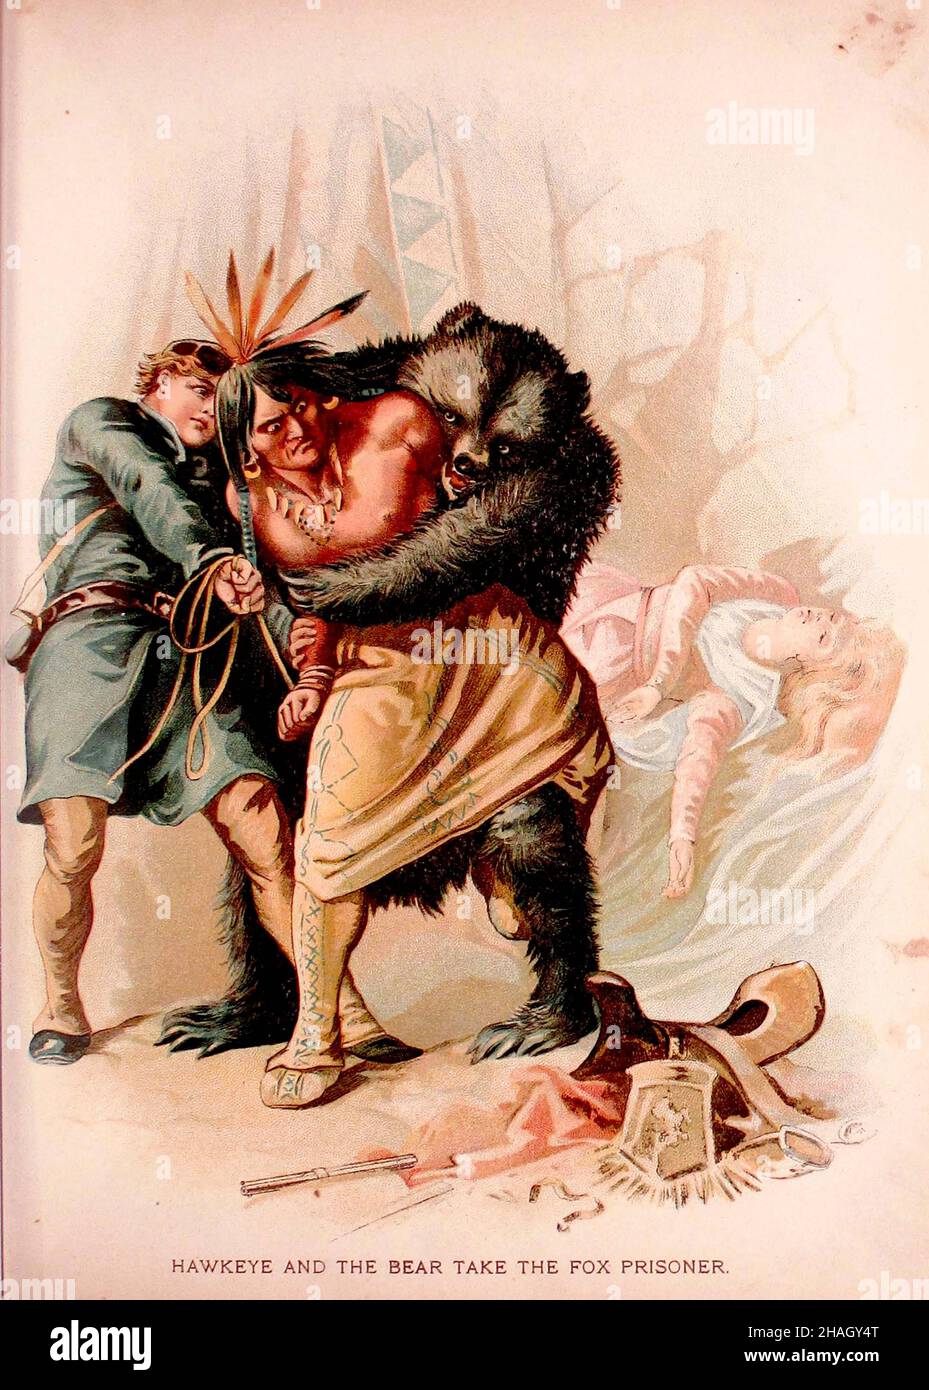 Hawleye and the Bear take the Fox prisoner from the book ' Historical Stories of American Pioneer Life ' by James Fenimore Cooper; illustrated by Michal Elwiro Andriolli and engraved by Edmund Evans Published in 1897 Stock Photo